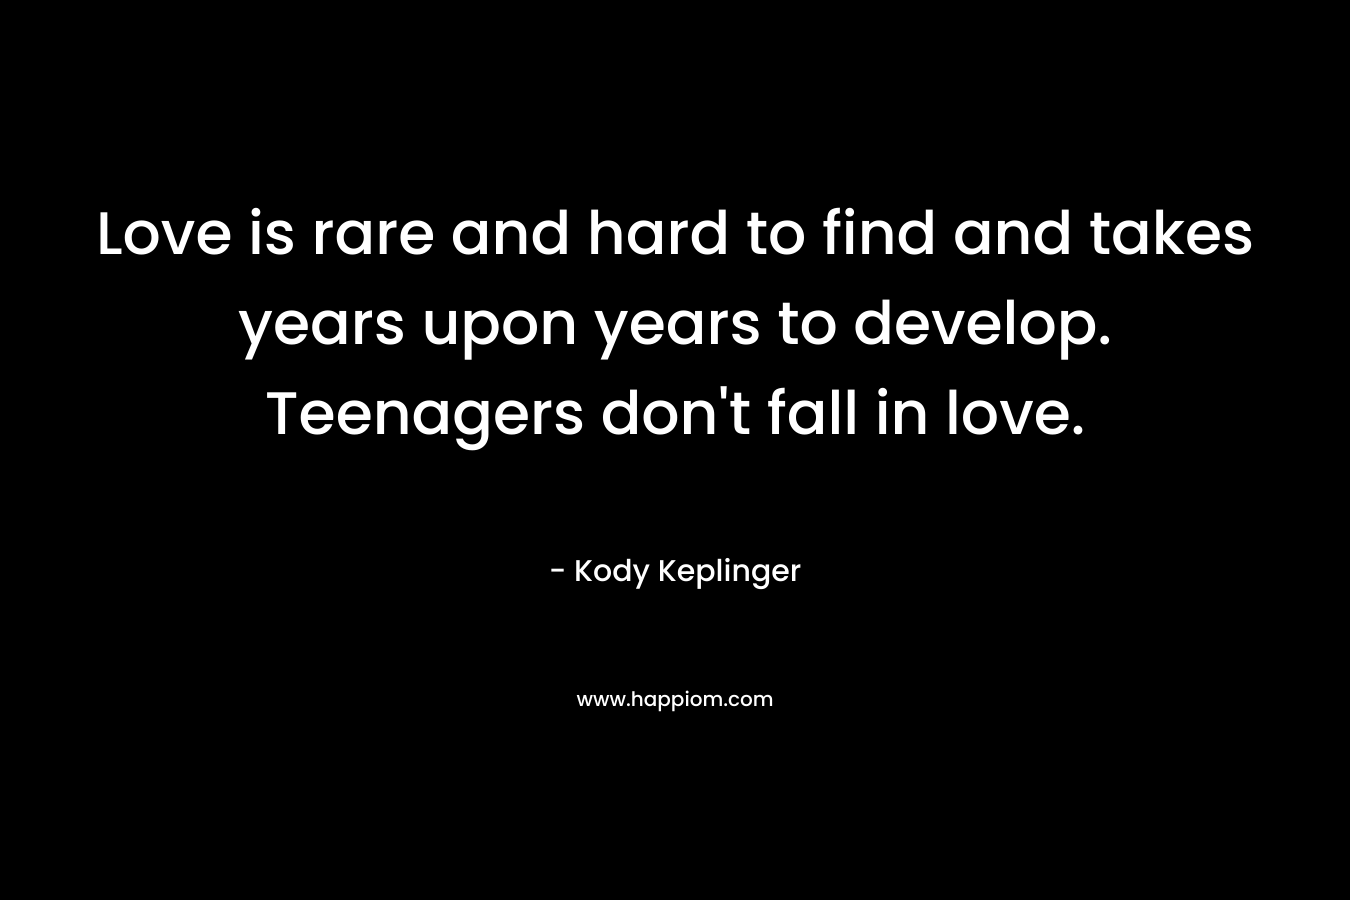 Love is rare and hard to find and takes years upon years to develop. Teenagers don’t fall in love. – Kody Keplinger